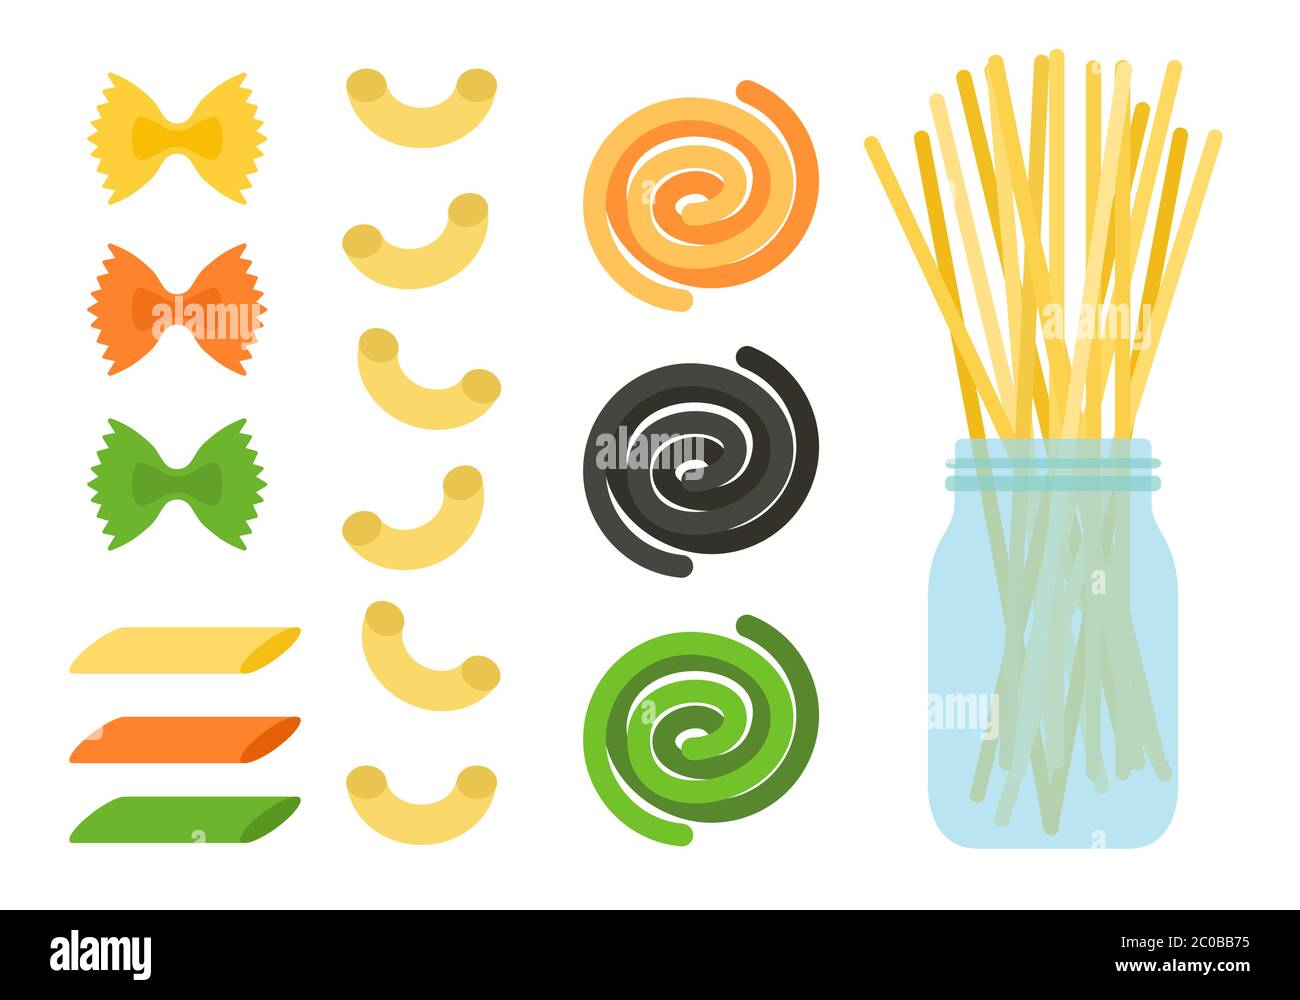 Pasta types Stock Vector Images - Alamy